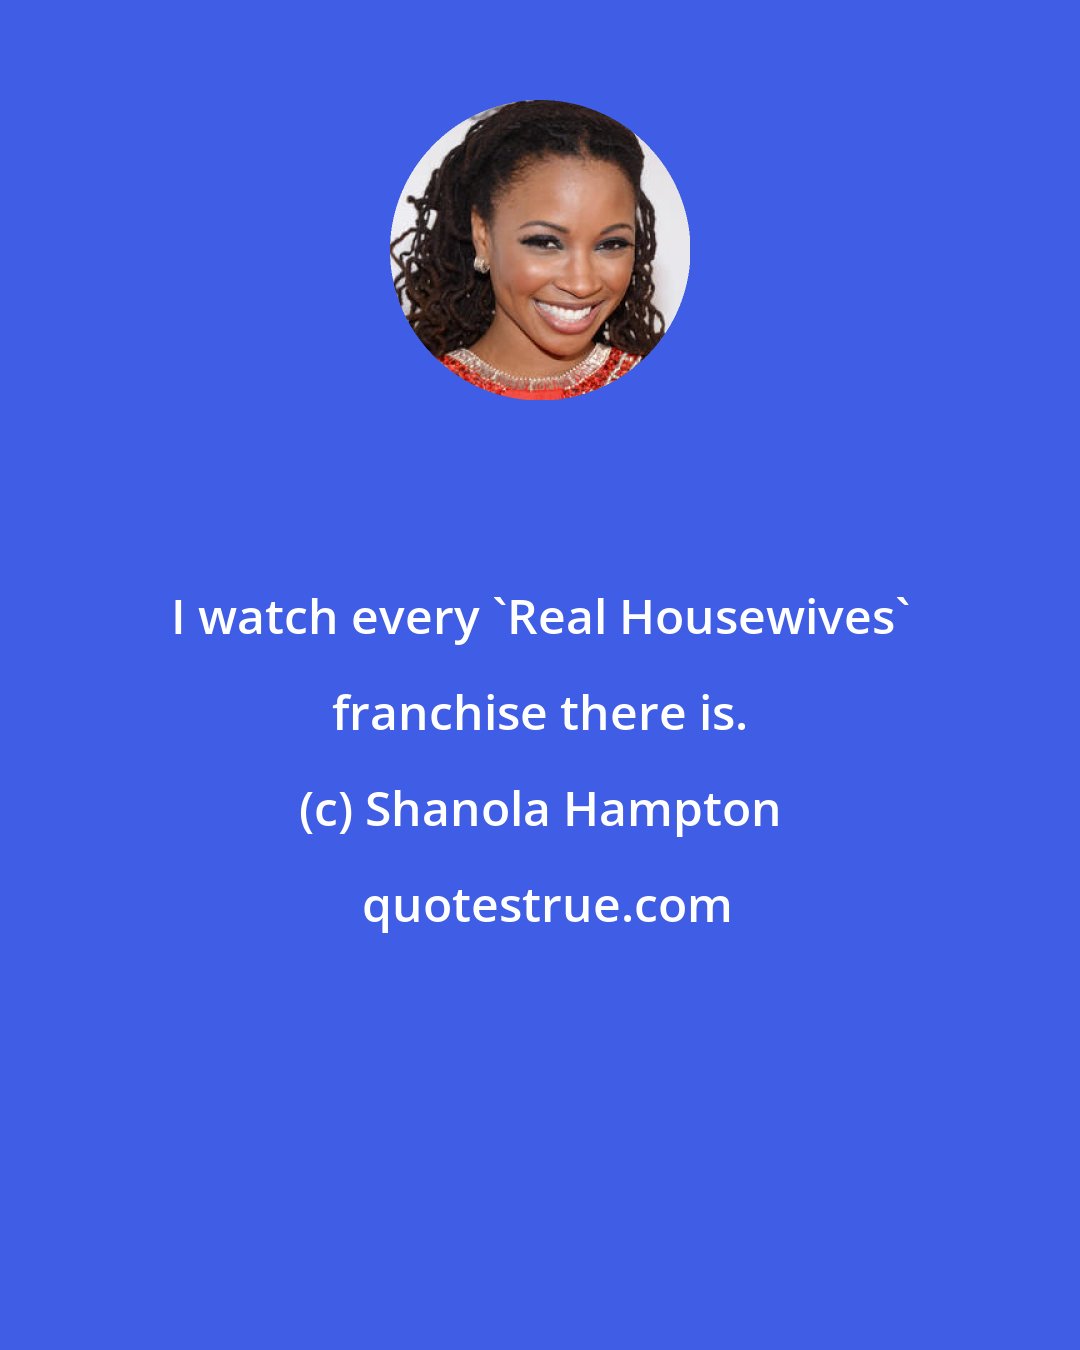 Shanola Hampton: I watch every 'Real Housewives' franchise there is.